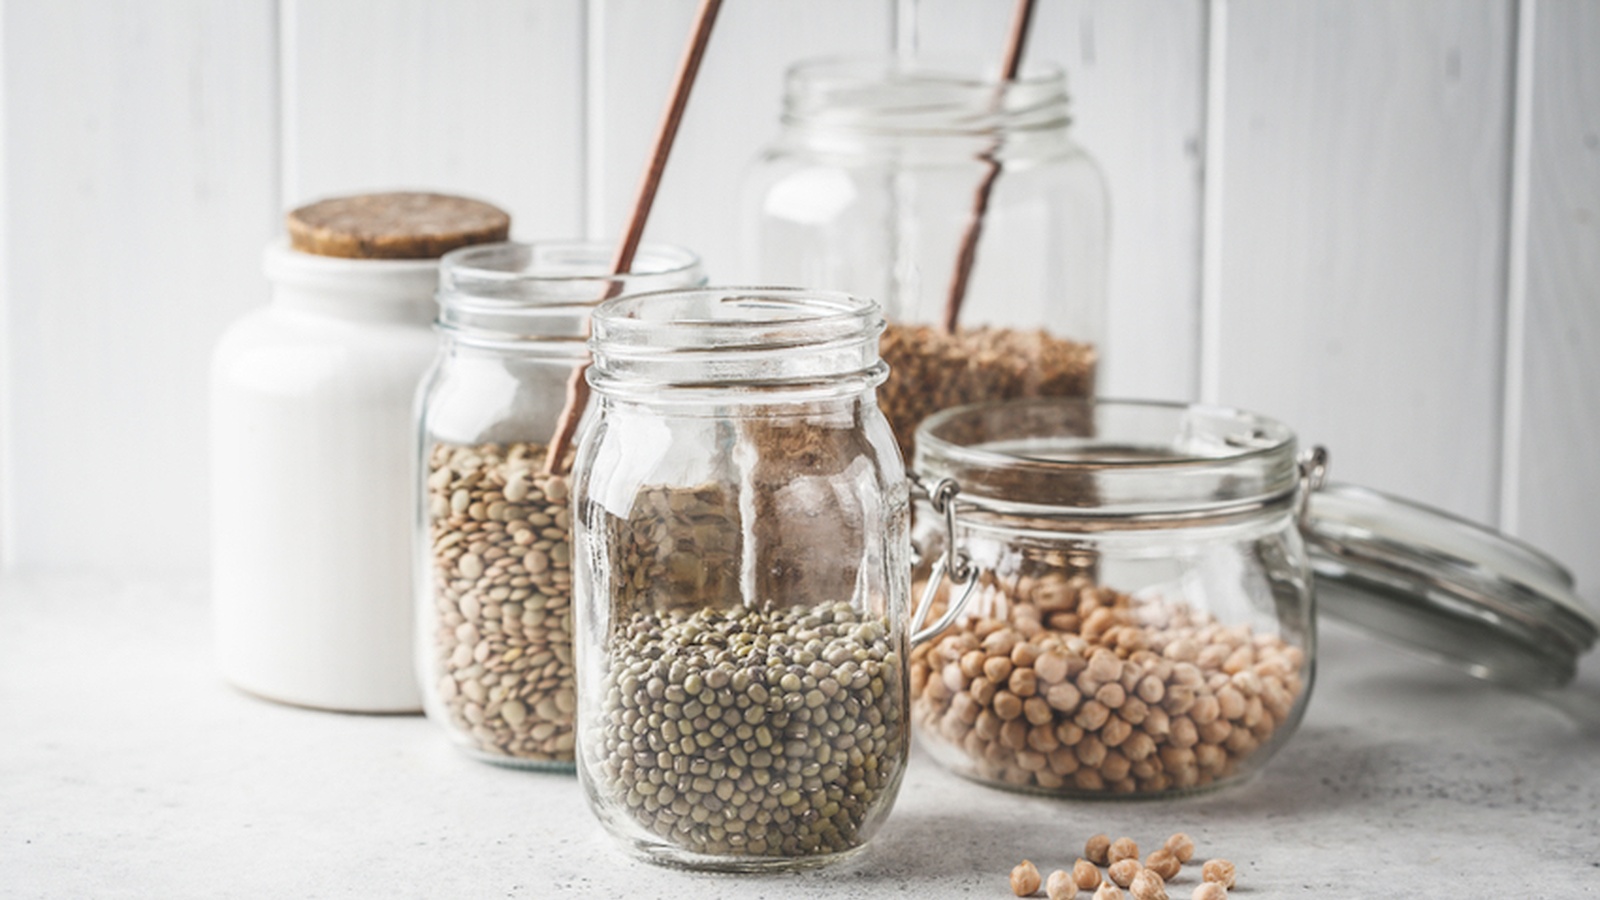 10 Ingredients Every Plant-Based Pantry Needs